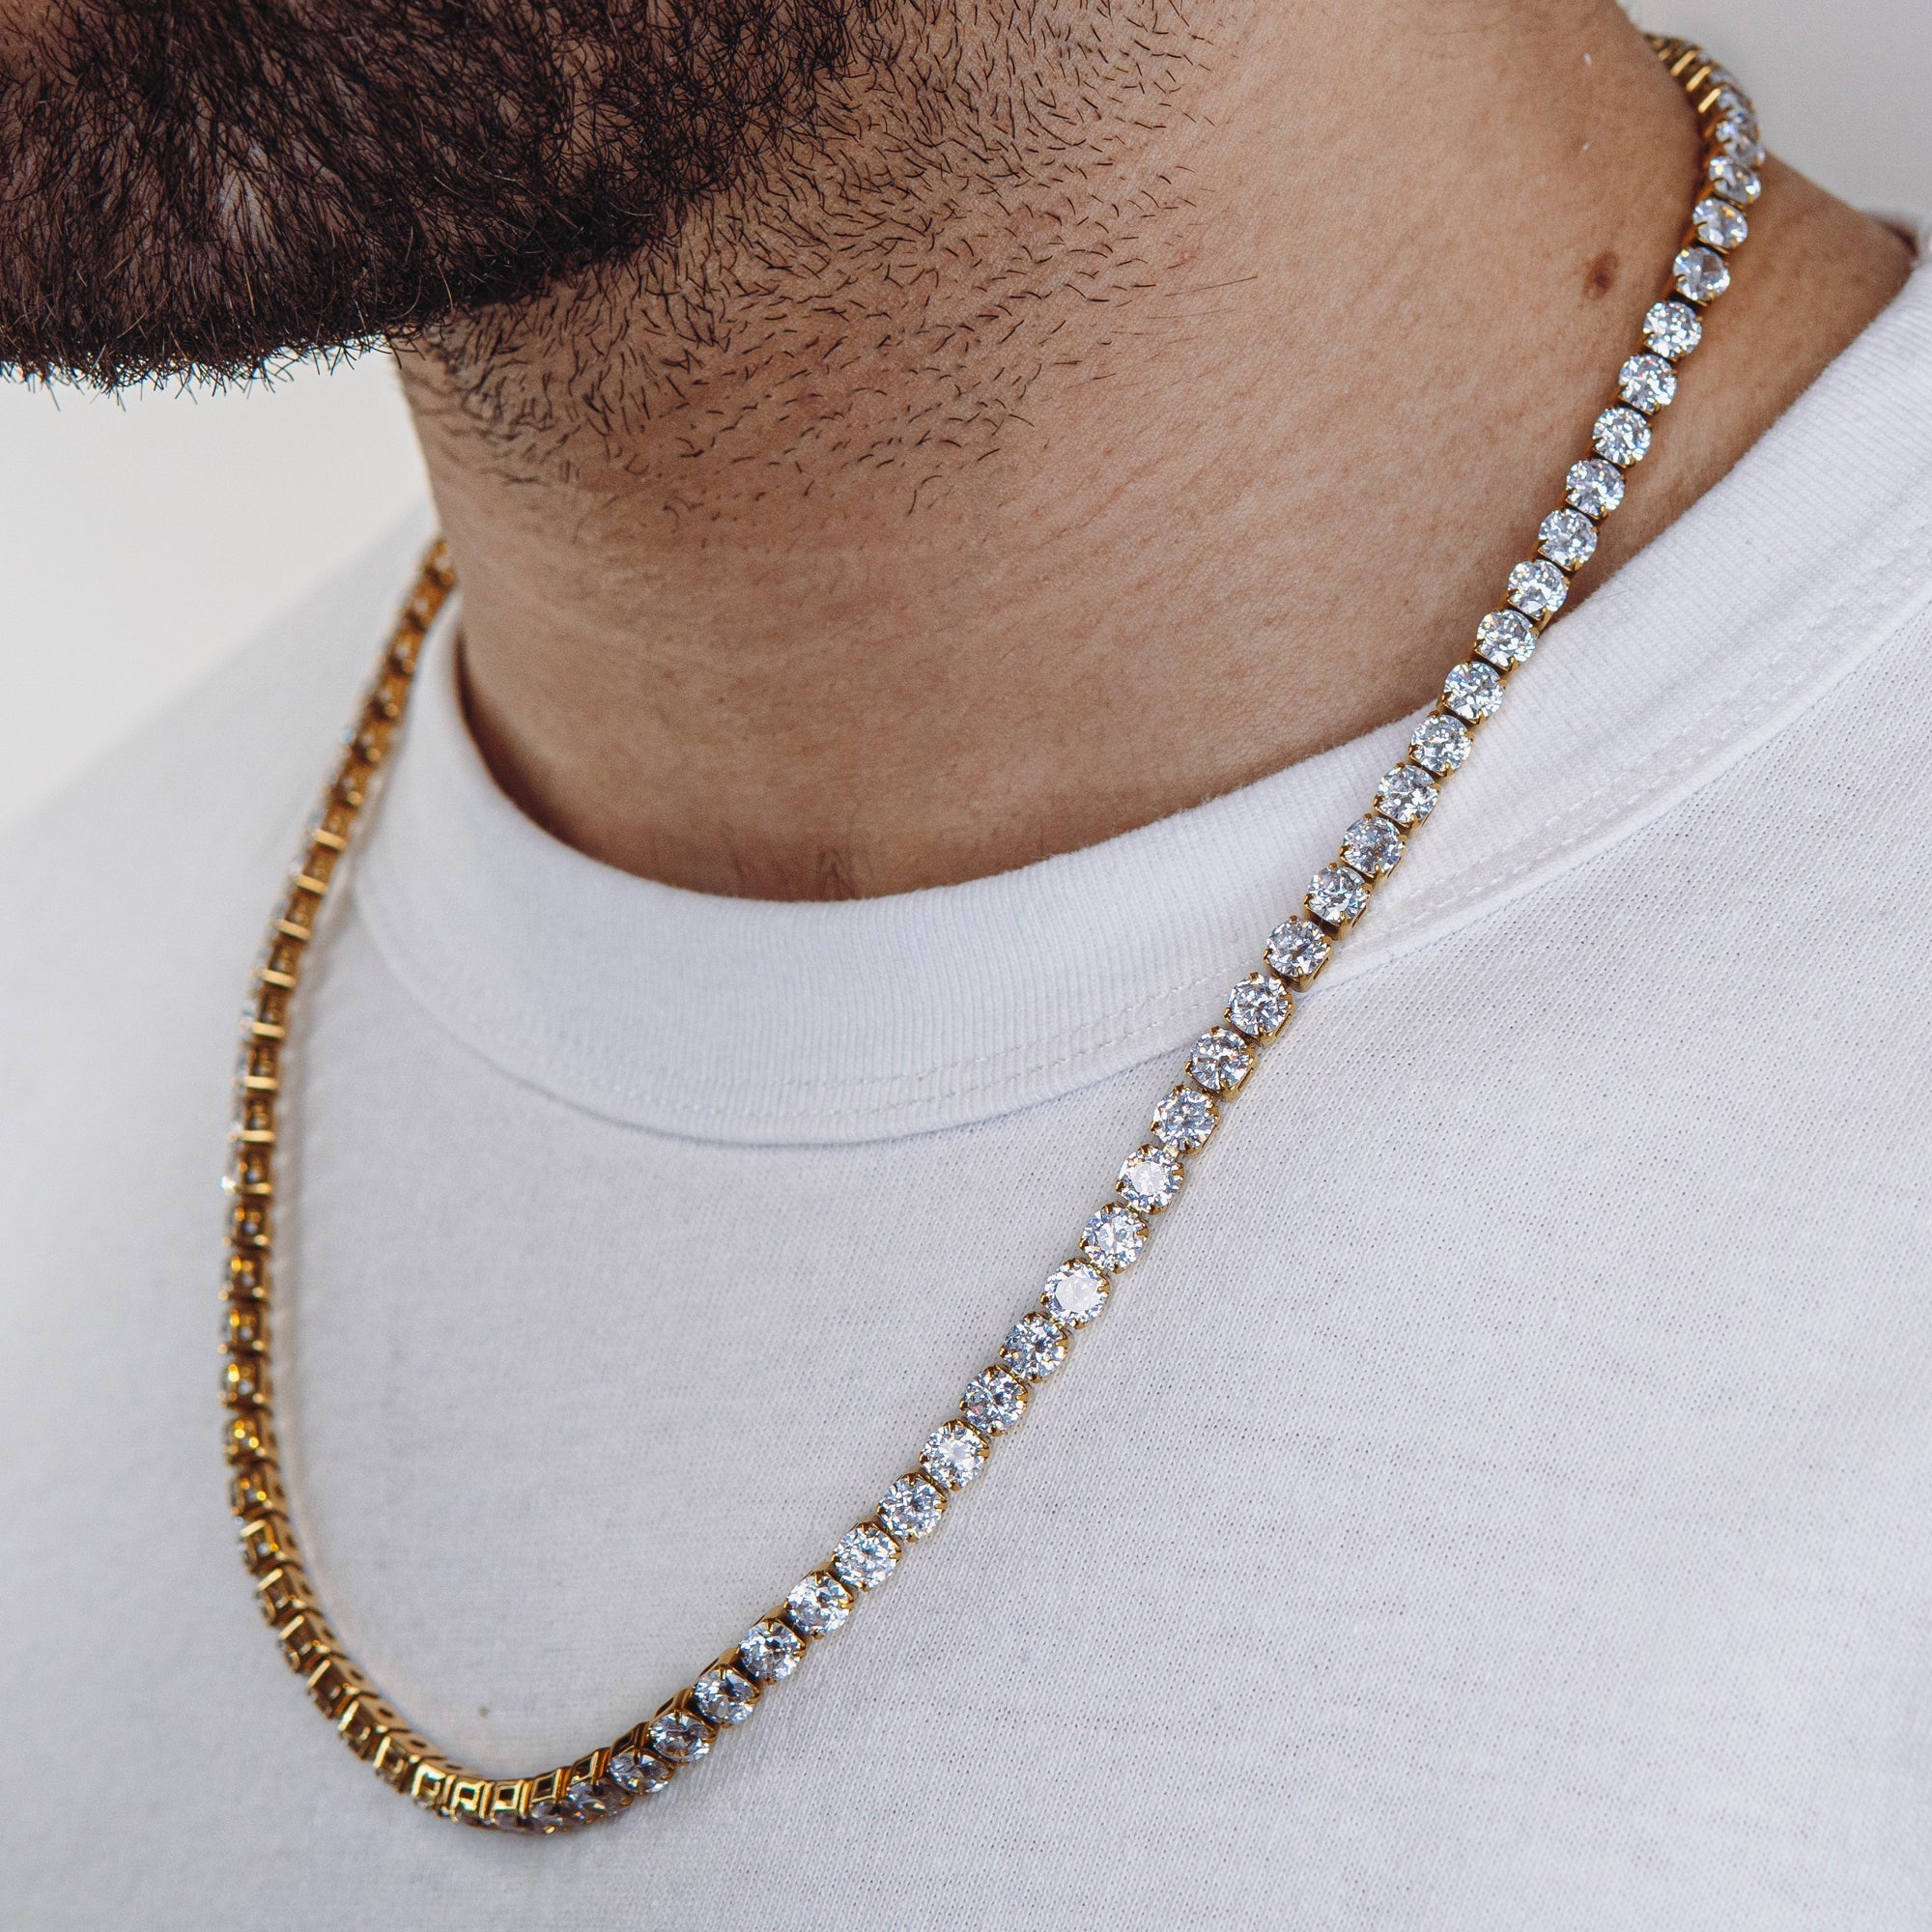 NIV'S BLING - 5mm Lab Diamond Tennis Chain for Men and Women | 18k Gold  Plated 1 Row Cubic Zirconia Hip Hop Jewelry Necklace | Amazon.com